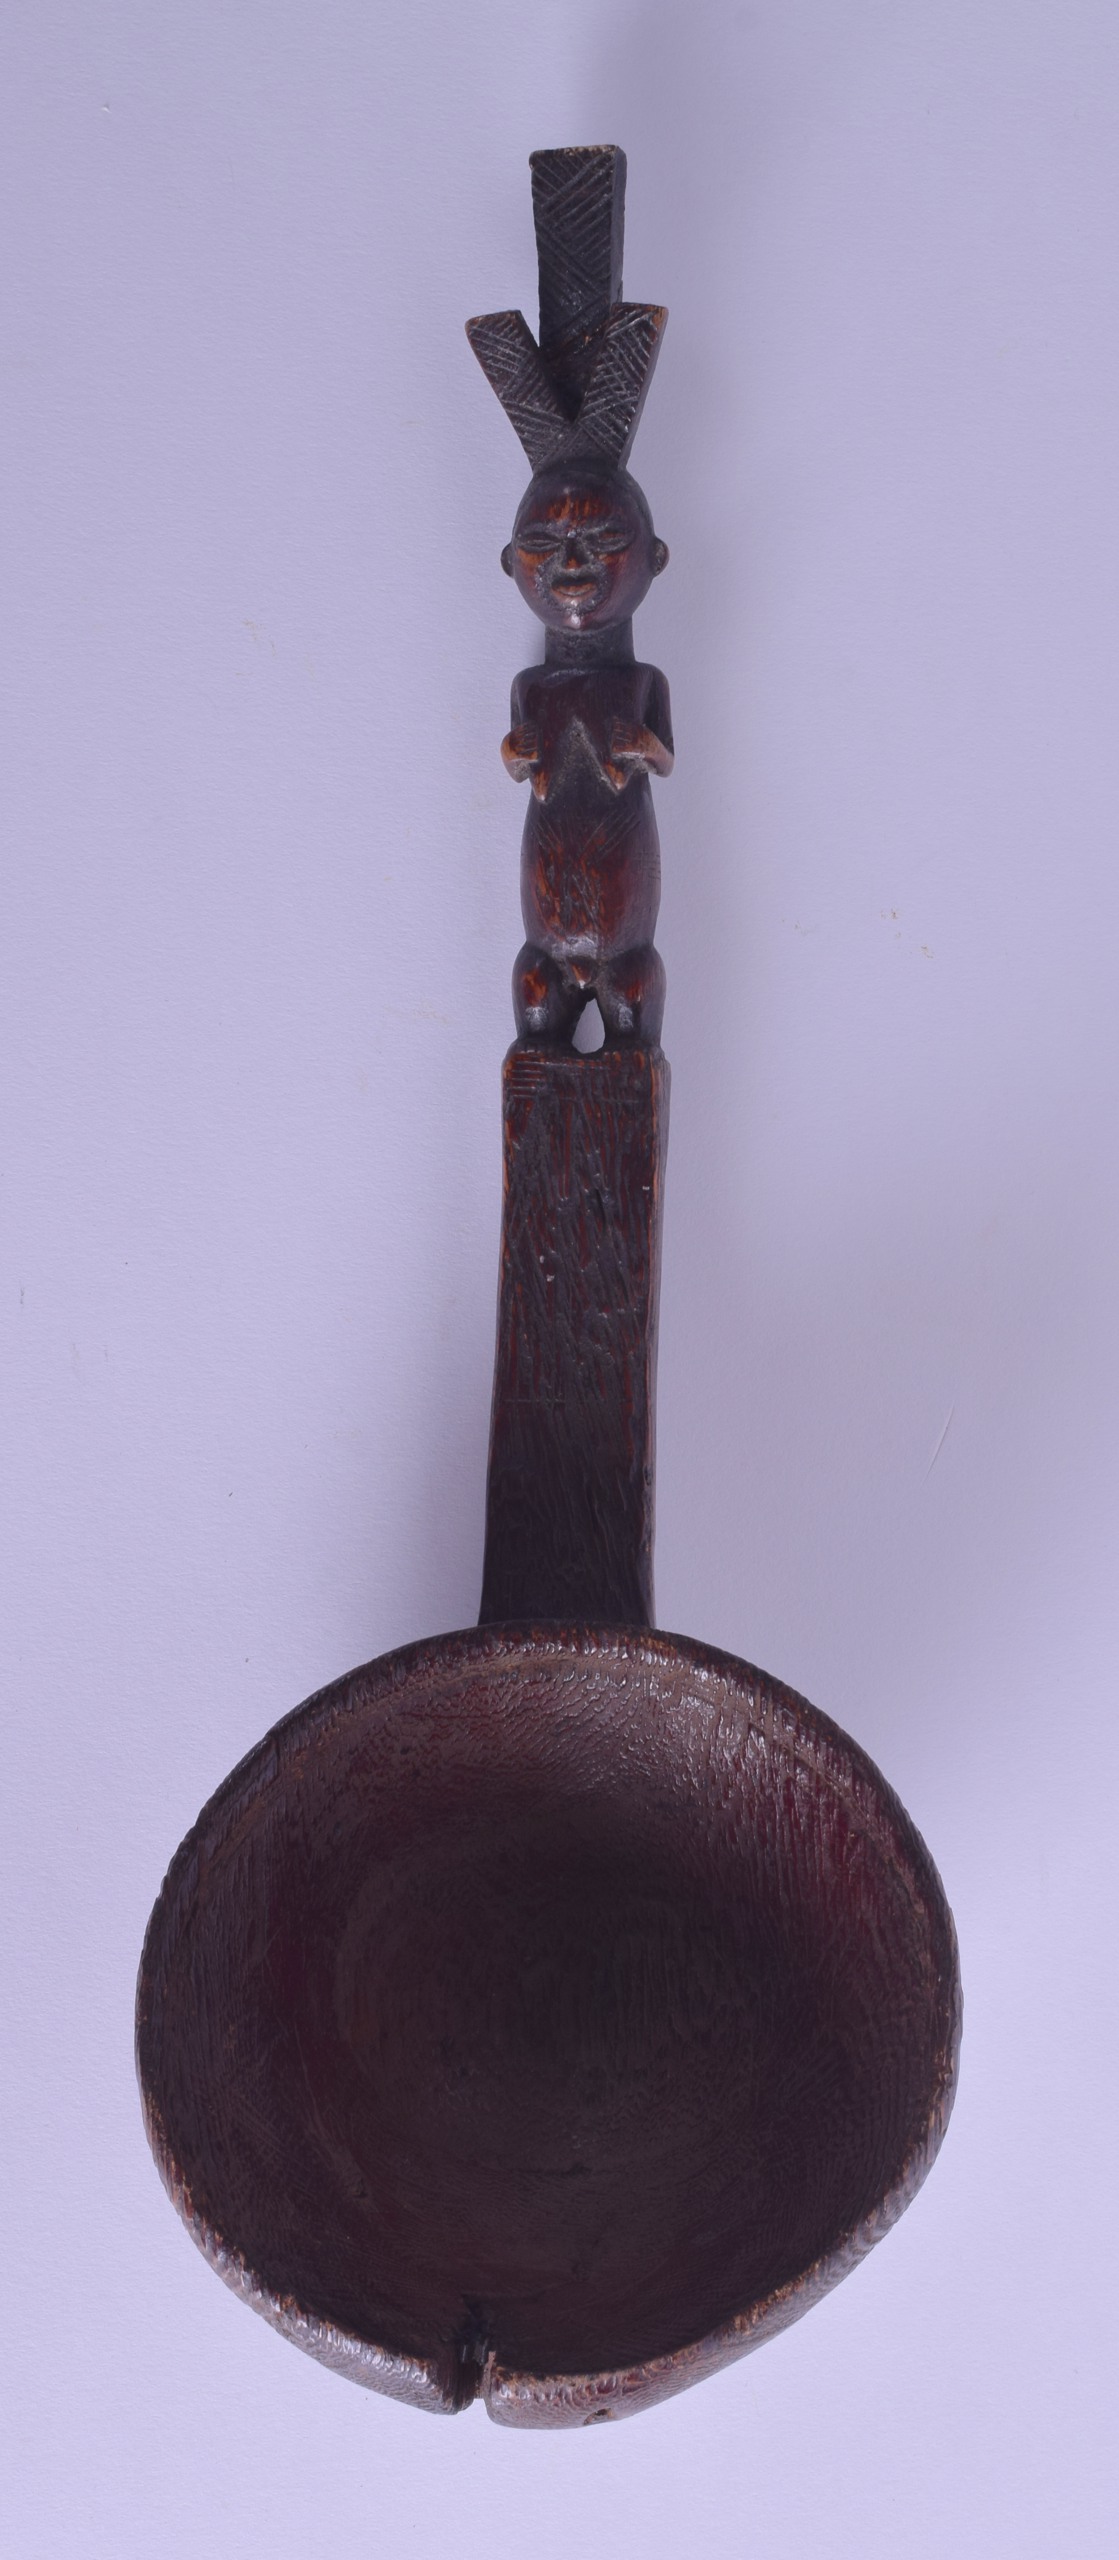 AN EARLY 20TH CENTURY AFRICAN CARVED TRIBAL FIGURAL SPOON modelled as a standing fertility figure